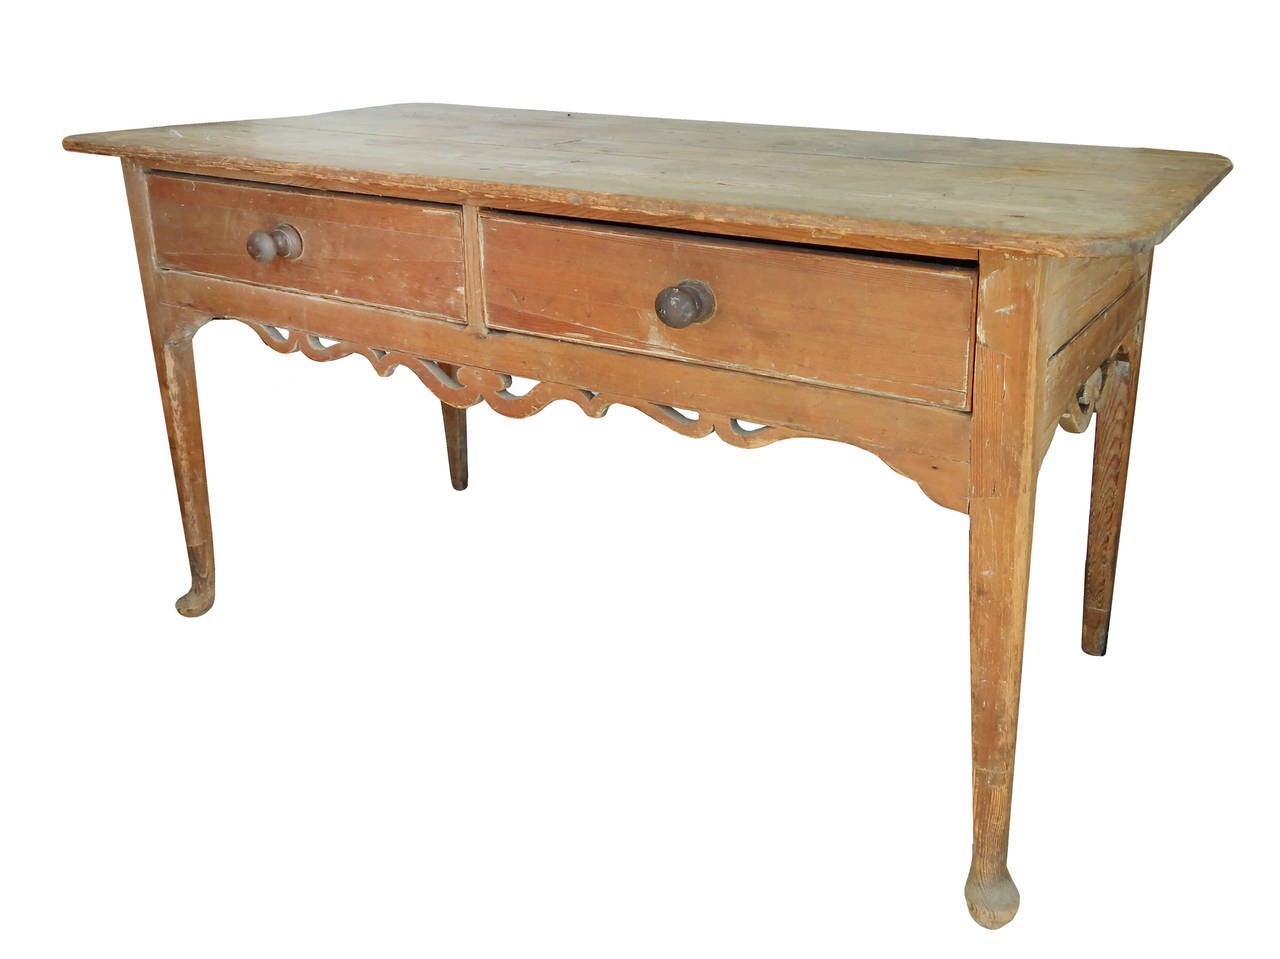 Charming European table with scroll apron and 2 drawers